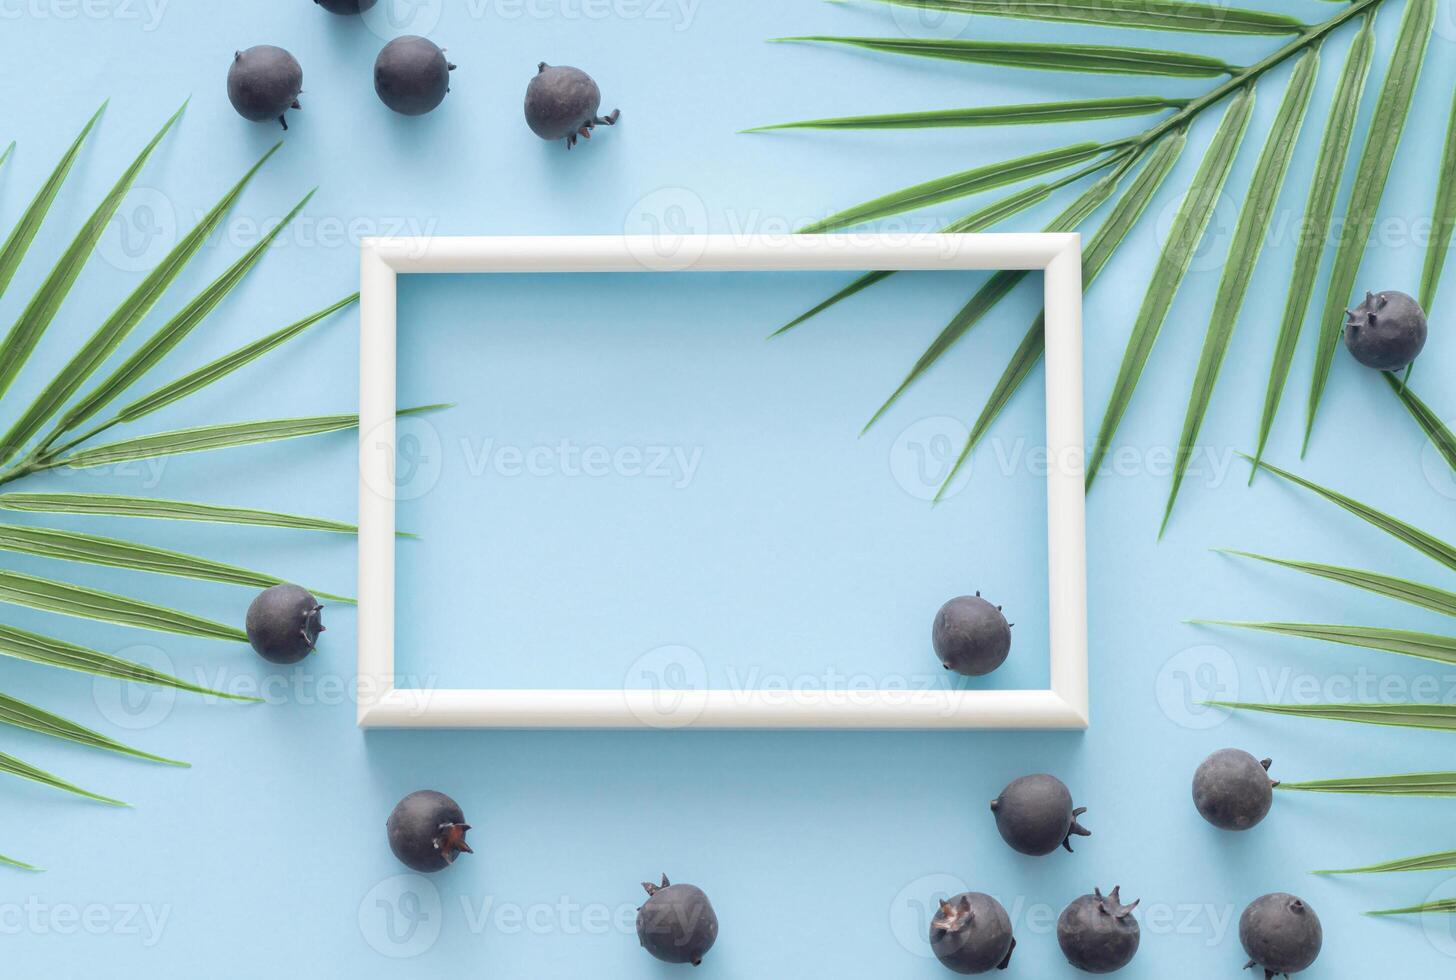 Blueberries and tropical palm leaves with white frame copy space on light blue background. Creative minimal healthy food concept. Trendy summer layout with berry fruit and green leaves. Flat lay. photo